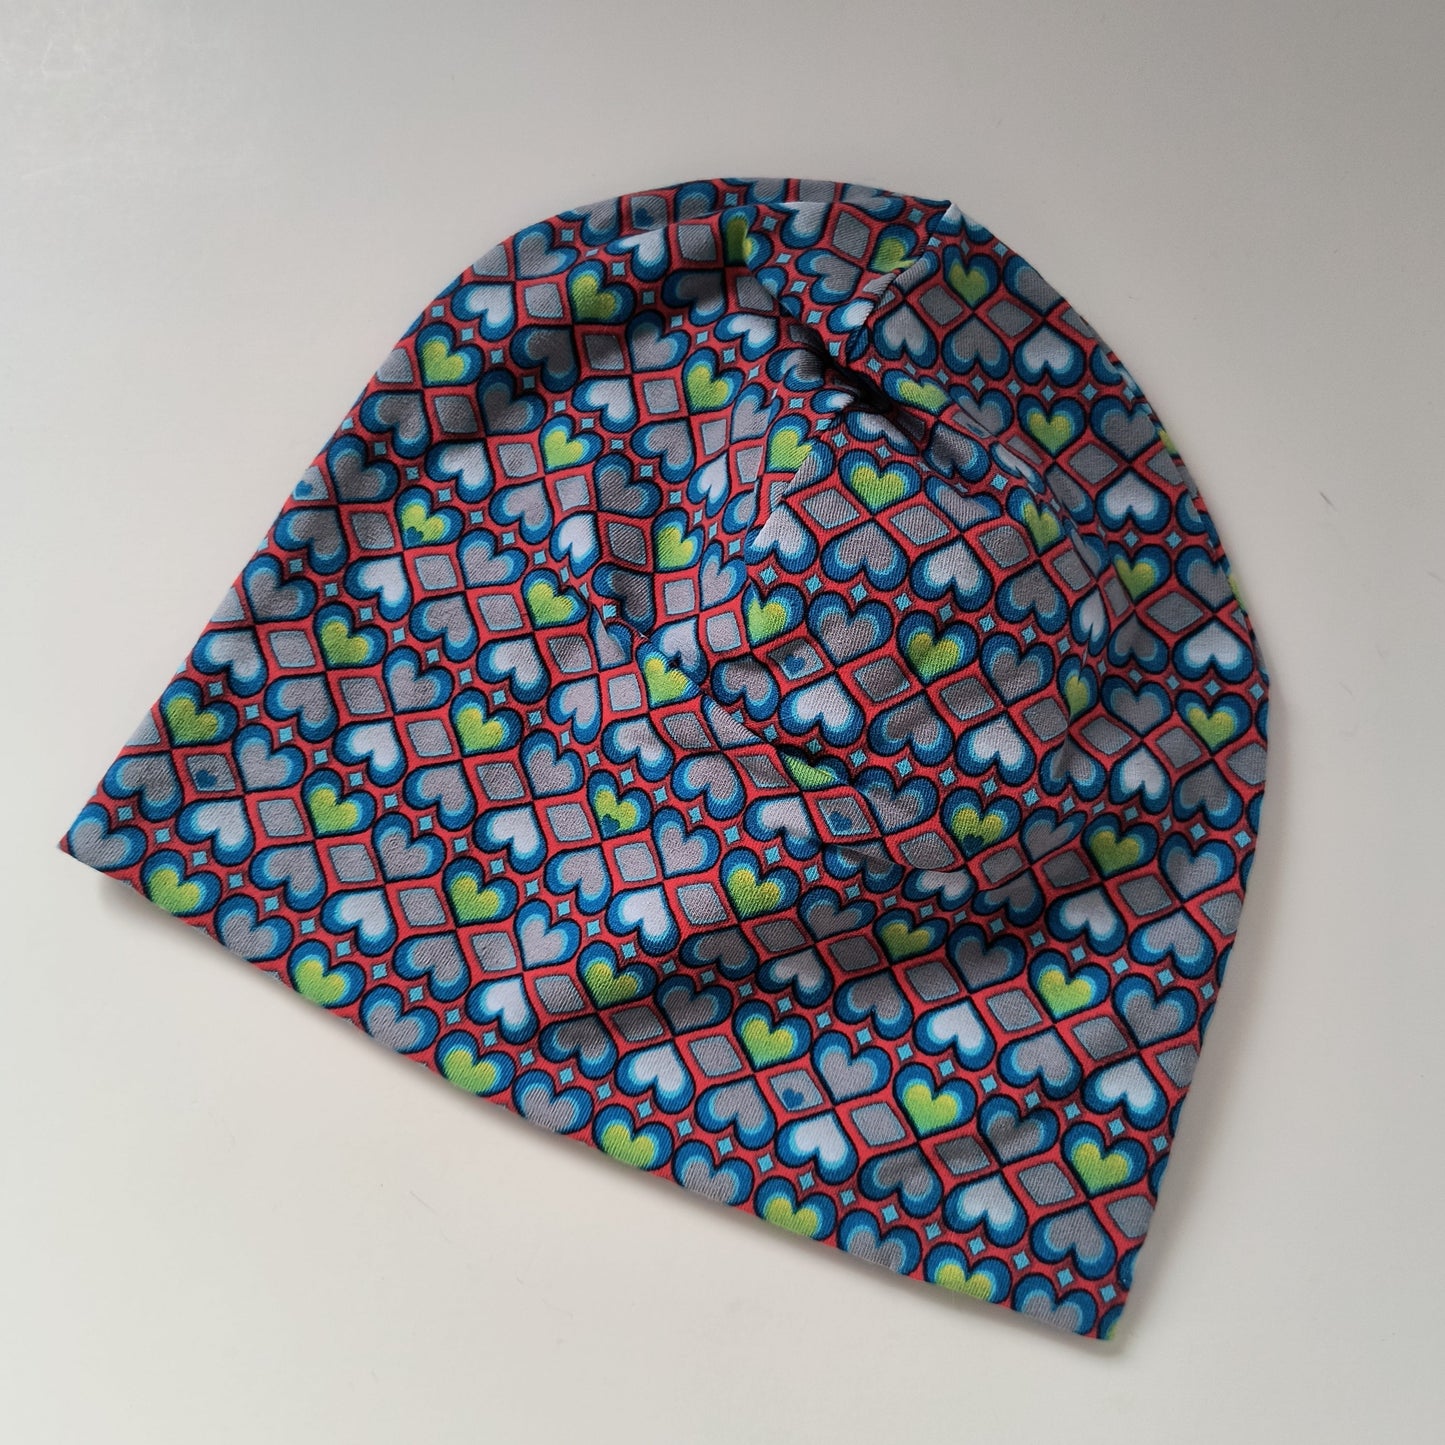 Toddler beanie hat, retro hearts, size EUR 52 cm head circumference/US 2-5 years (Handmade in Canada)